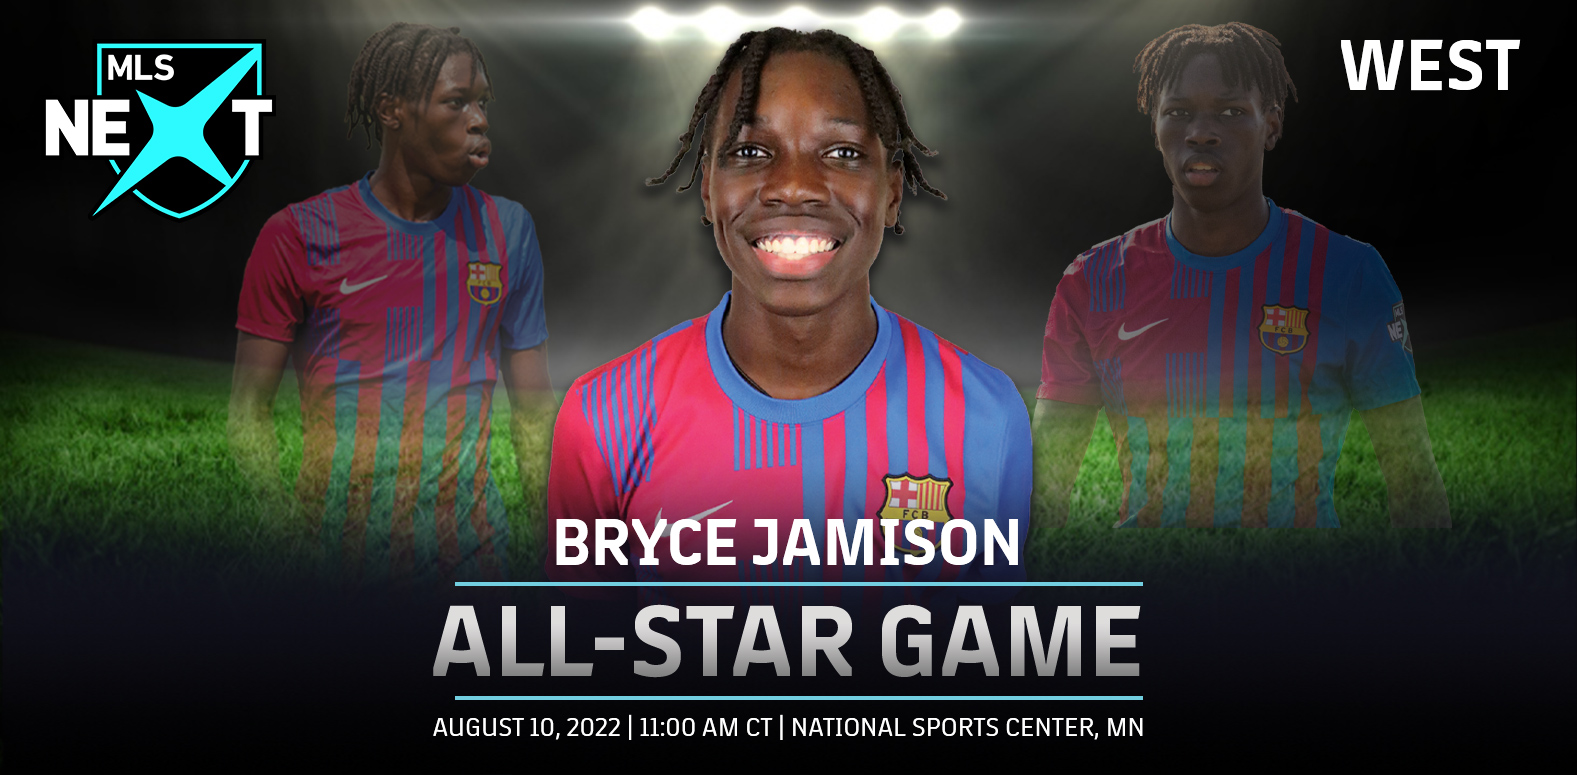 Barca Residency Academy forward Bryce Jamison has been named a 2022 MLS Next All-Star